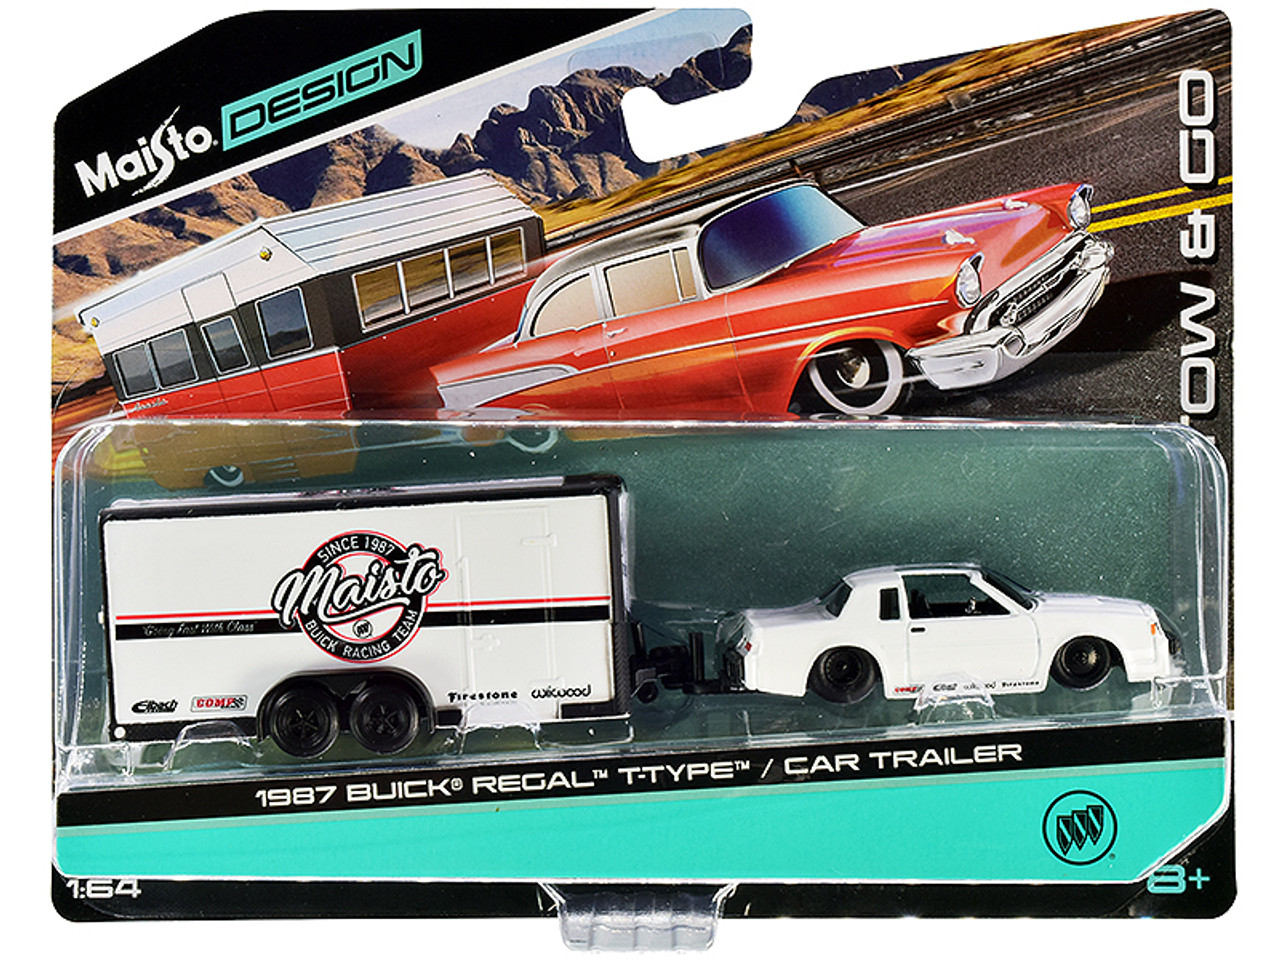 1987 Buick Regal T-Type and Enclosed Car Trailer White "Tow & Go" Series 1/64 Diecast Models by Maisto